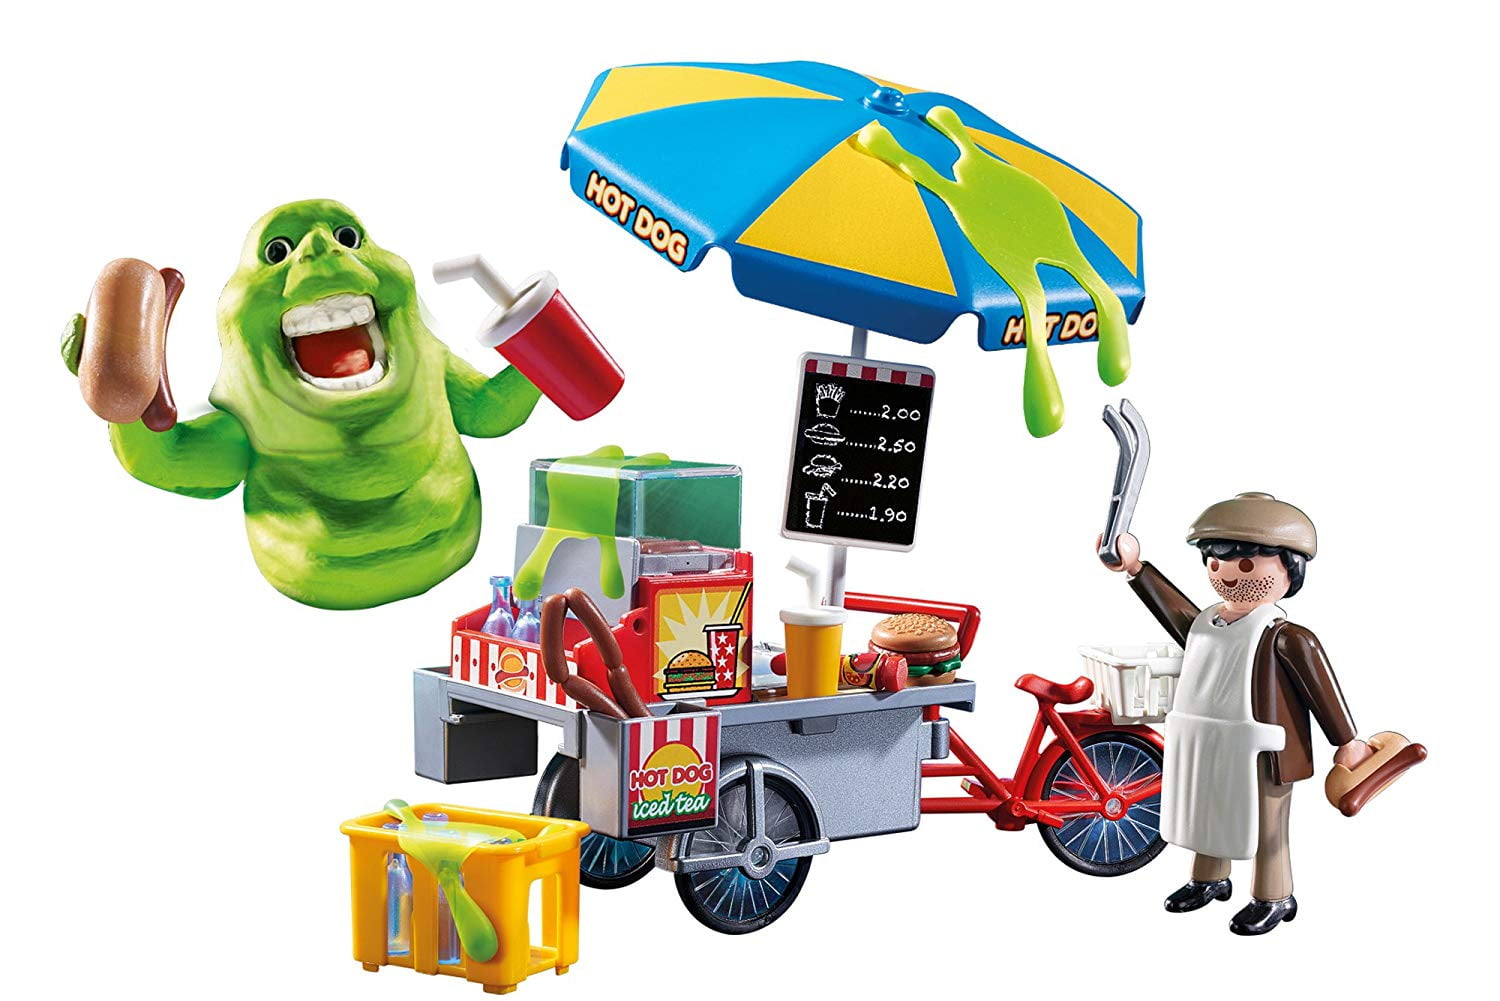 PLAYMOBIL Ghostbusters Slimer with Hot 